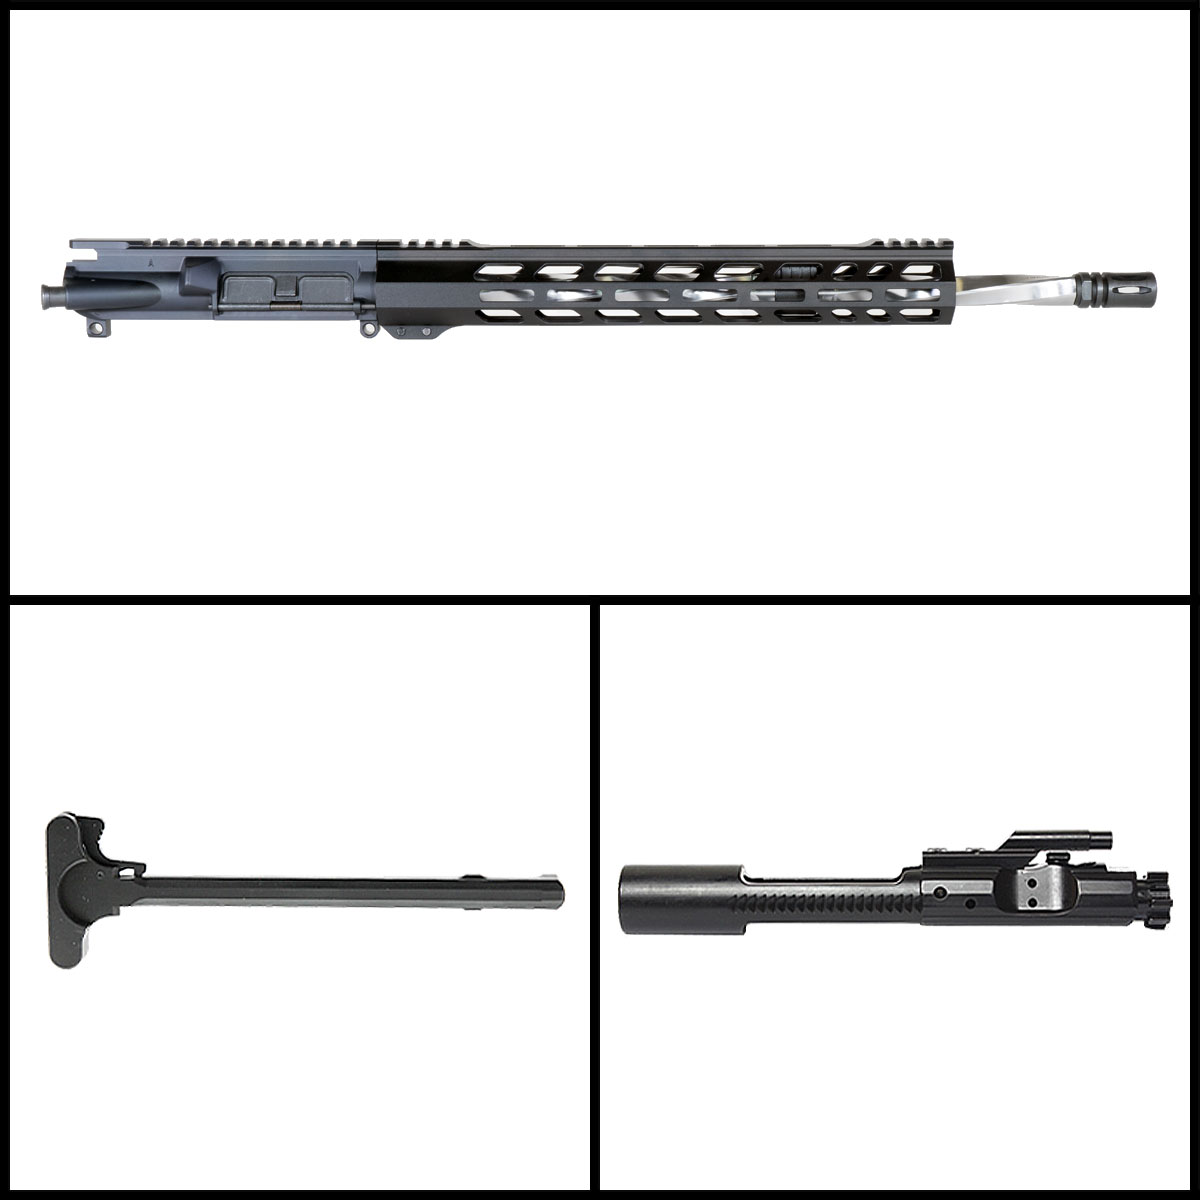 'Lightning Rod' 17.1-inch AR-15 .223 Wylde Stainless Rifle Complete ...